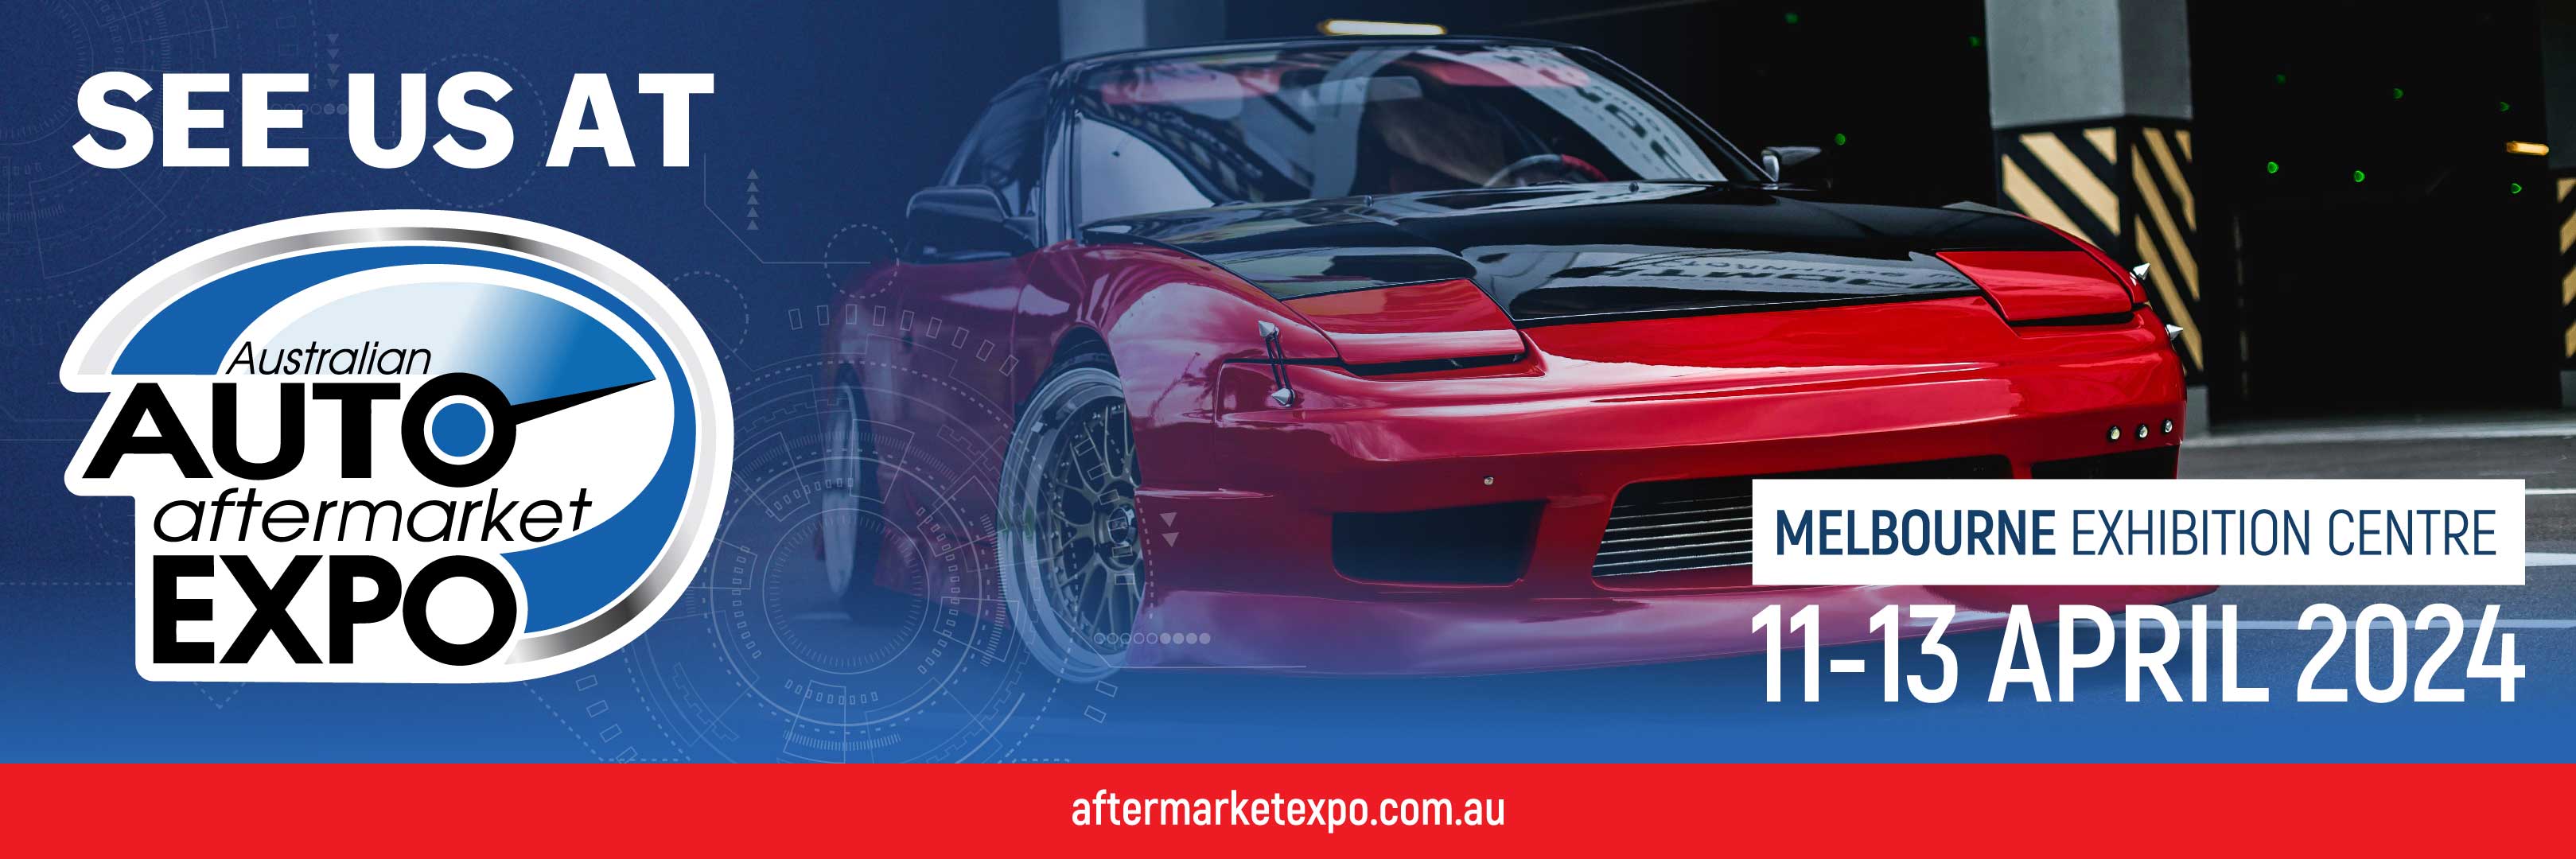 Join Warren and Brown Tools at AAAA Auto Aftermarket Expo